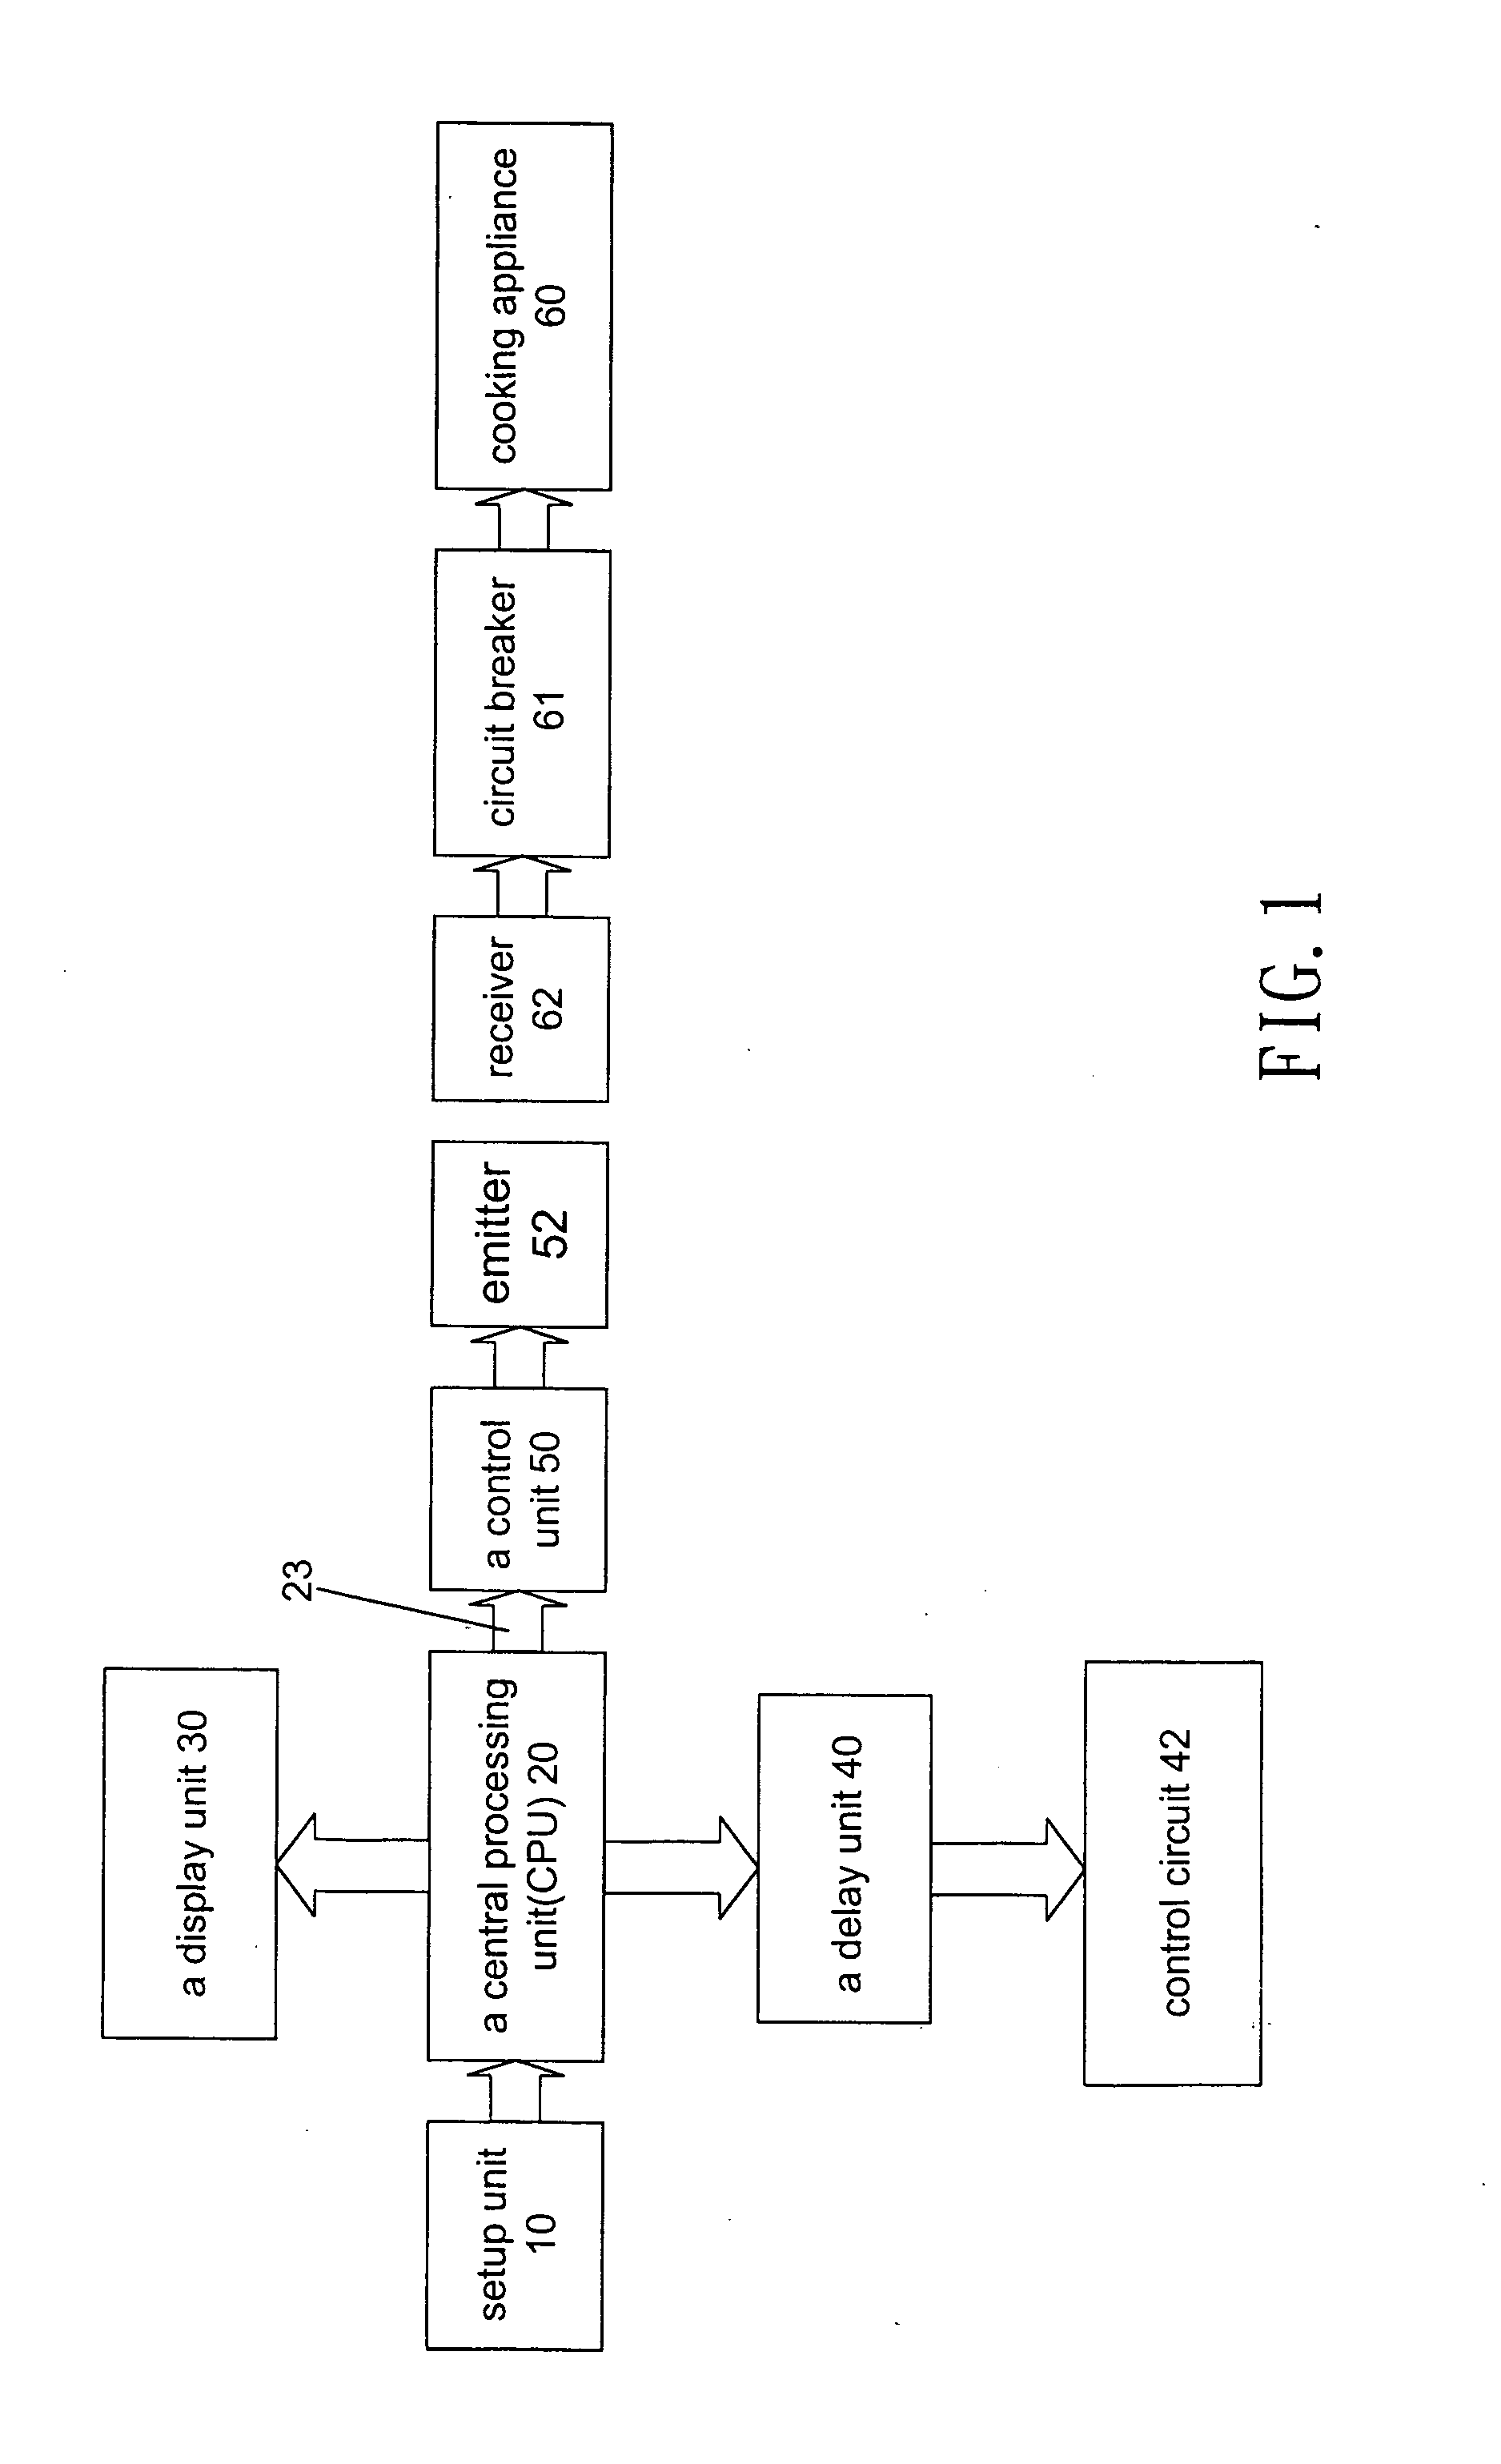 Safety and power saving device for a kitchen ventilator